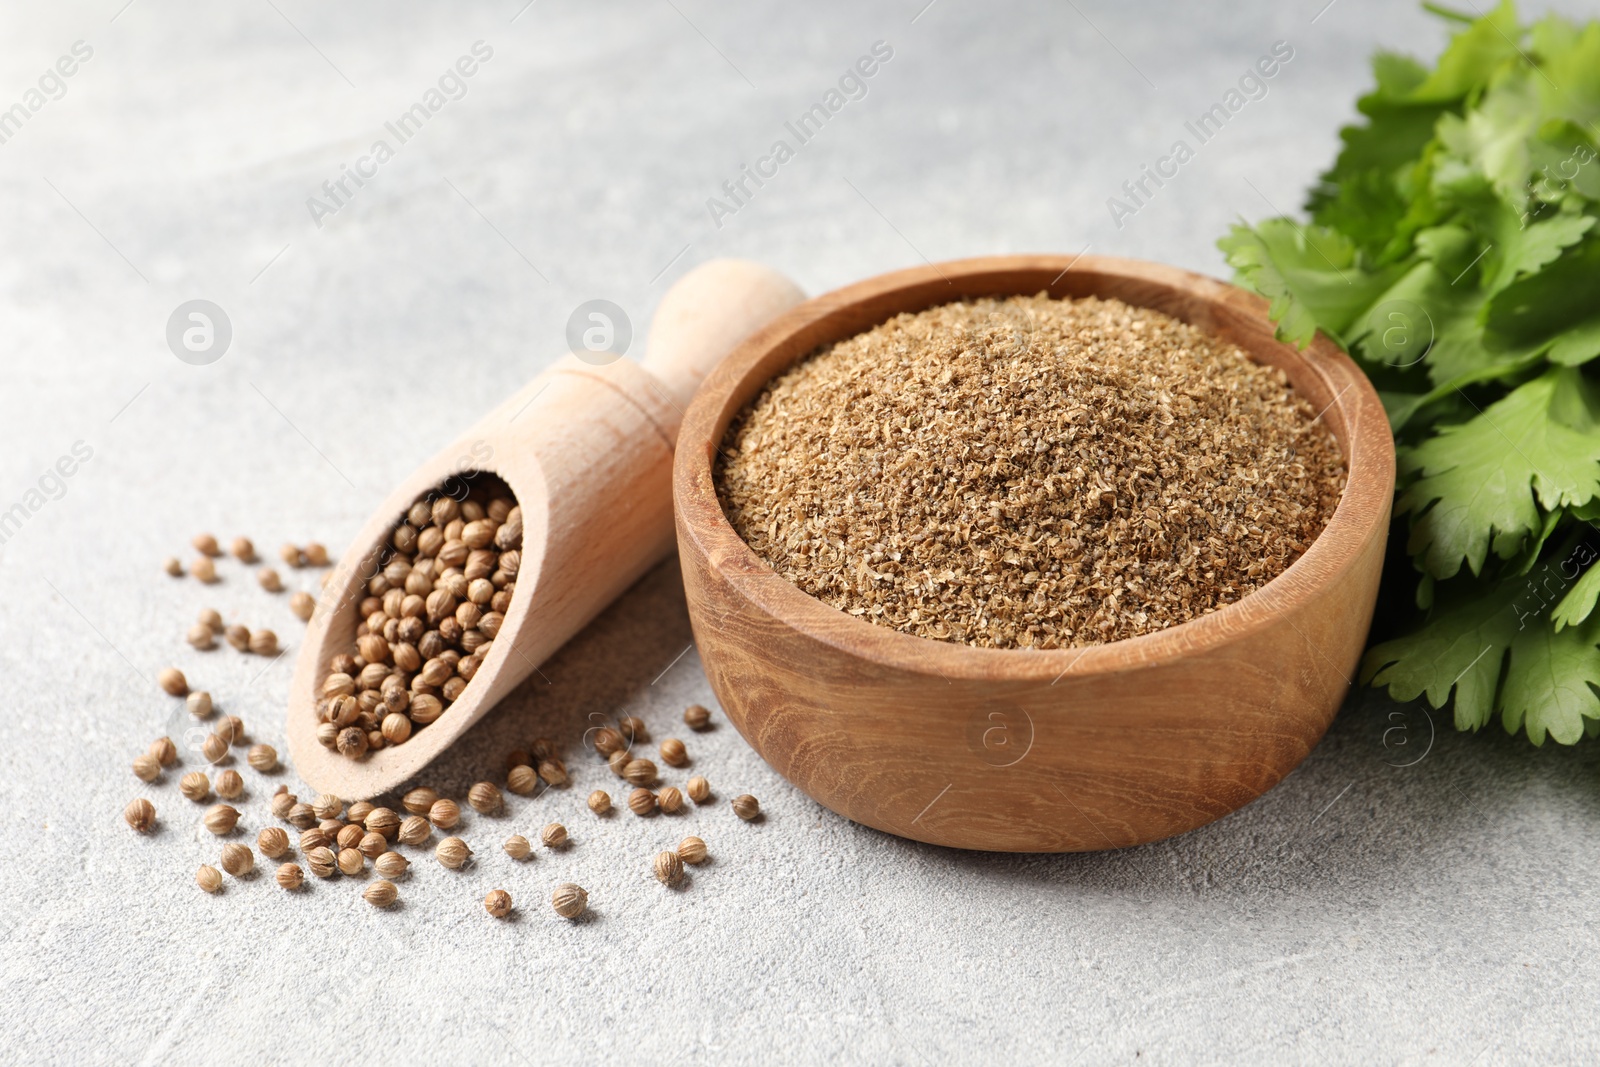 Photo of Coriander powder in bowl, seeds and green leaves on light grey table